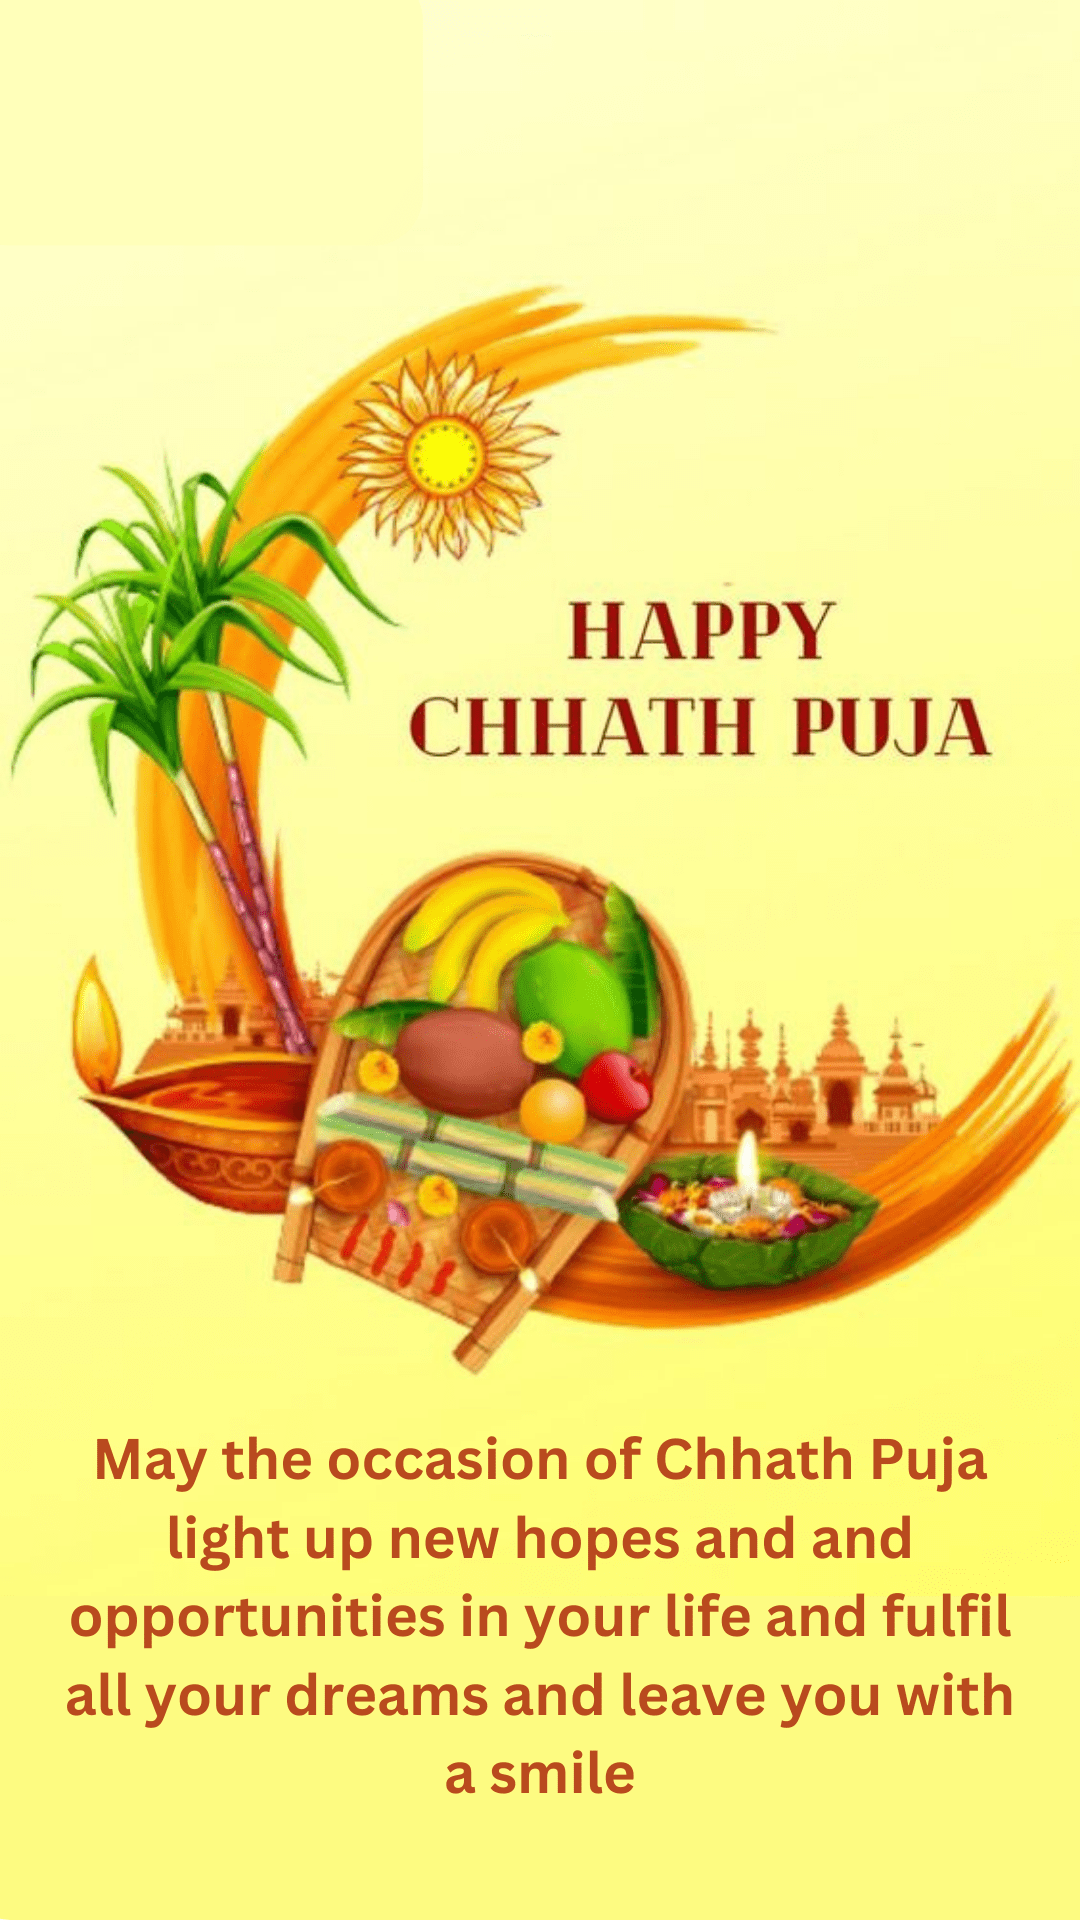 #{"id":261,"_id":"61f3f785e0f744570541c134","name":"chhath-puja-quotes","count":33,"data":"{\"_id\":{\"$oid\":\"61f3f785e0f744570541c134\"},\"id\":\"235\",\"name\":\"chhath-puja-quotes\",\"created_at\":\"2020-11-18-11:29:13\",\"updated_at\":\"2020-11-18-11:29:13\",\"updatedAt\":{\"$date\":\"2022-01-28T14:33:44.898Z\"},\"count\":33}","deleted_at":null,"created_at":"2020-11-18T11:29:13.000000Z","updated_at":"2020-11-18T11:29:13.000000Z","merge_with":null,"pivot":{"taggable_id":2424,"tag_id":261,"taggable_type":"App\\Models\\Status"}}, #{"id":2597,"_id":null,"name":"chhath-puja-status","count":0,"data":null,"deleted_at":null,"created_at":"2023-09-26T09:40:01.000000Z","updated_at":"2023-09-26T09:40:01.000000Z","merge_with":null,"pivot":{"taggable_id":2424,"tag_id":2597,"taggable_type":"App\\Models\\Status"}}, #{"id":264,"_id":"61f3f785e0f744570541c137","name":"chhath-puja-images","count":6,"data":"{\"_id\":{\"$oid\":\"61f3f785e0f744570541c137\"},\"id\":\"238\",\"name\":\"chhath-puja-images\",\"created_at\":\"2020-11-18-11:39:00\",\"updated_at\":\"2020-11-18-11:39:00\",\"updatedAt\":{\"$date\":\"2022-01-28T14:33:44.898Z\"},\"count\":6}","deleted_at":null,"created_at":"2020-11-18T11:39:00.000000Z","updated_at":"2020-11-18T11:39:00.000000Z","merge_with":null,"pivot":{"taggable_id":2424,"tag_id":264,"taggable_type":"App\\Models\\Status"}}, #{"id":260,"_id":"61f3f785e0f744570541c133","name":"chhath-puja-shayari","count":33,"data":"{\"_id\":{\"$oid\":\"61f3f785e0f744570541c133\"},\"id\":\"234\",\"name\":\"chhath-puja-shayari\",\"created_at\":\"2020-11-18-11:29:13\",\"updated_at\":\"2020-11-18-11:29:13\",\"updatedAt\":{\"$date\":\"2022-01-28T14:33:44.898Z\"},\"count\":33}","deleted_at":null,"created_at":"2020-11-18T11:29:13.000000Z","updated_at":"2020-11-18T11:29:13.000000Z","merge_with":null,"pivot":{"taggable_id":2424,"tag_id":260,"taggable_type":"App\\Models\\Status"}}, #{"id":2598,"_id":null,"name":"chhath-puja-2023-wishes","count":0,"data":null,"deleted_at":null,"created_at":"2023-09-26T09:40:01.000000Z","updated_at":"2023-09-26T09:40:01.000000Z","merge_with":null,"pivot":{"taggable_id":2424,"tag_id":2598,"taggable_type":"App\\Models\\Status"}}, #{"id":2599,"_id":null,"name":"chhath-puja-whatsapp-status","count":0,"data":null,"deleted_at":null,"created_at":"2023-09-26T09:40:01.000000Z","updated_at":"2023-09-26T09:40:01.000000Z","merge_with":null,"pivot":{"taggable_id":2424,"tag_id":2599,"taggable_type":"App\\Models\\Status"}}